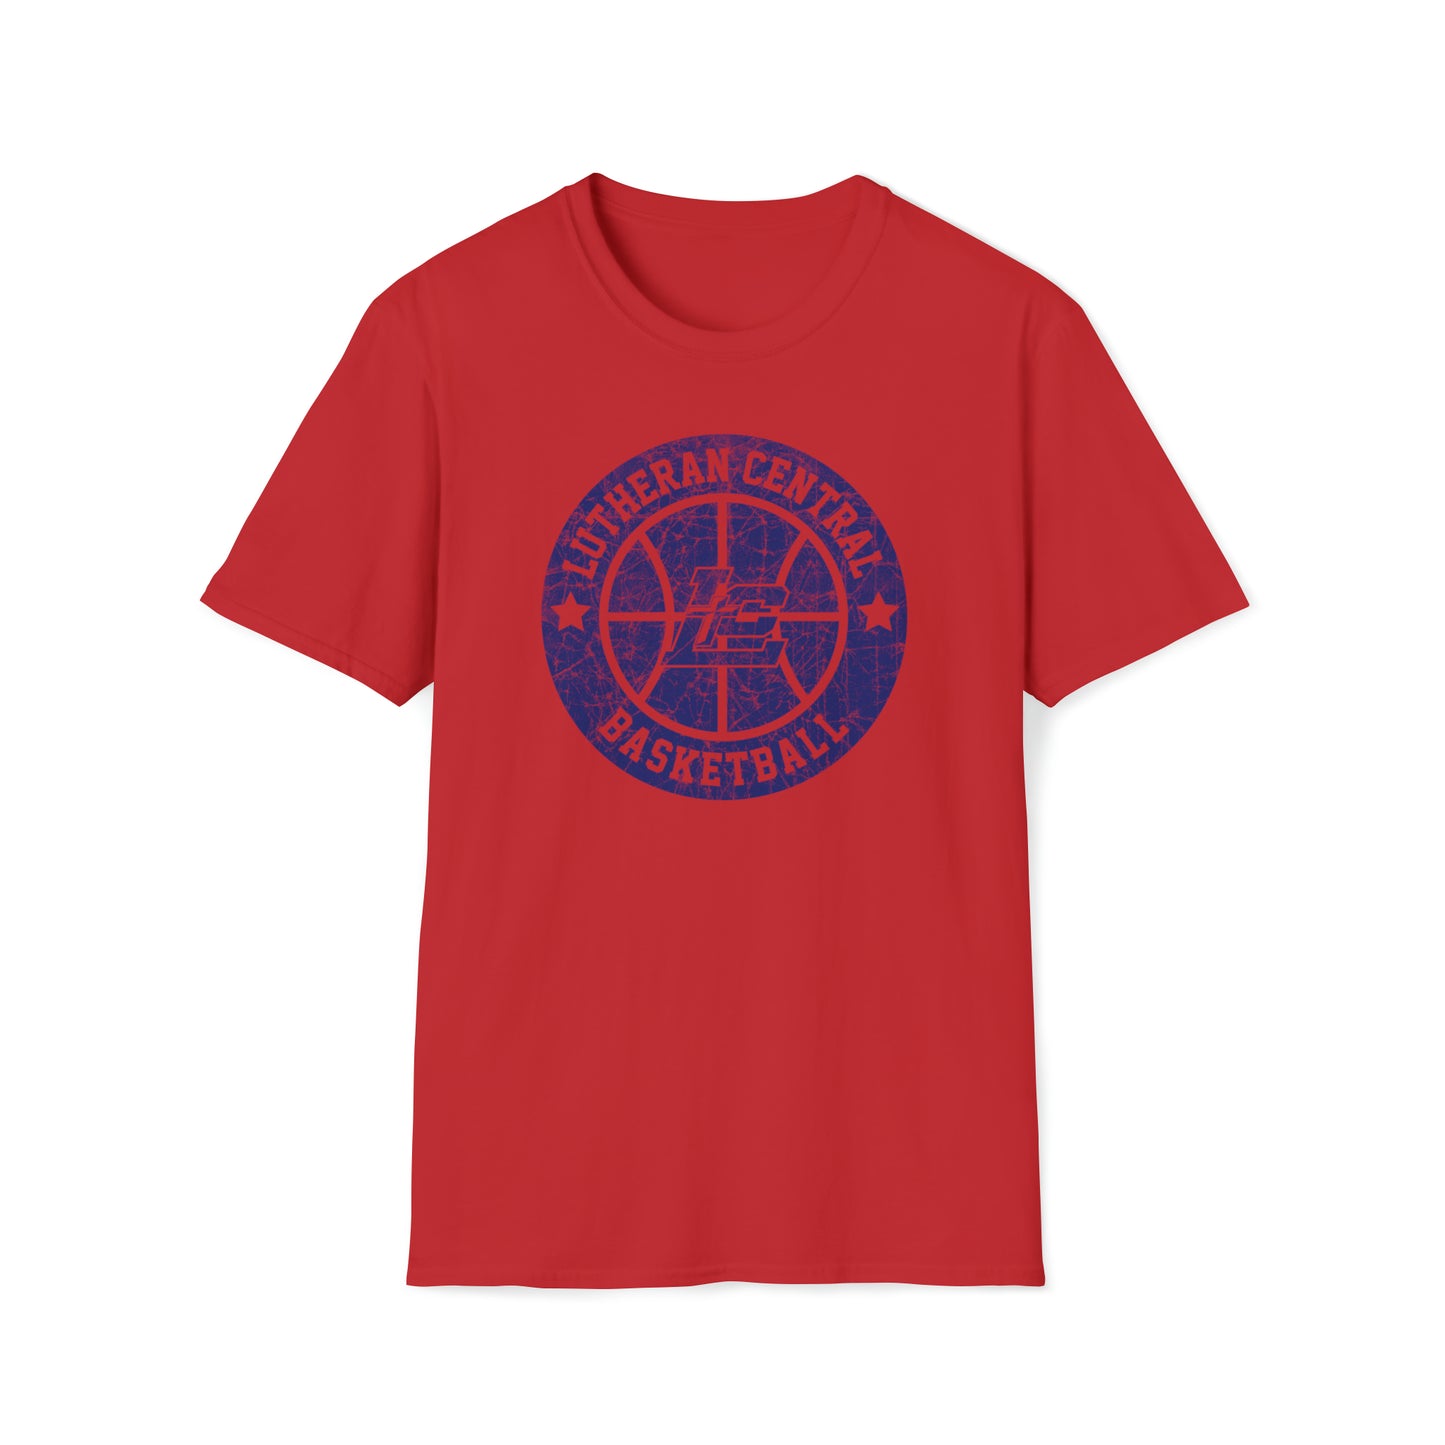 Vintage Lutheran Central Basketball Unisex Softstyle T-Shirt